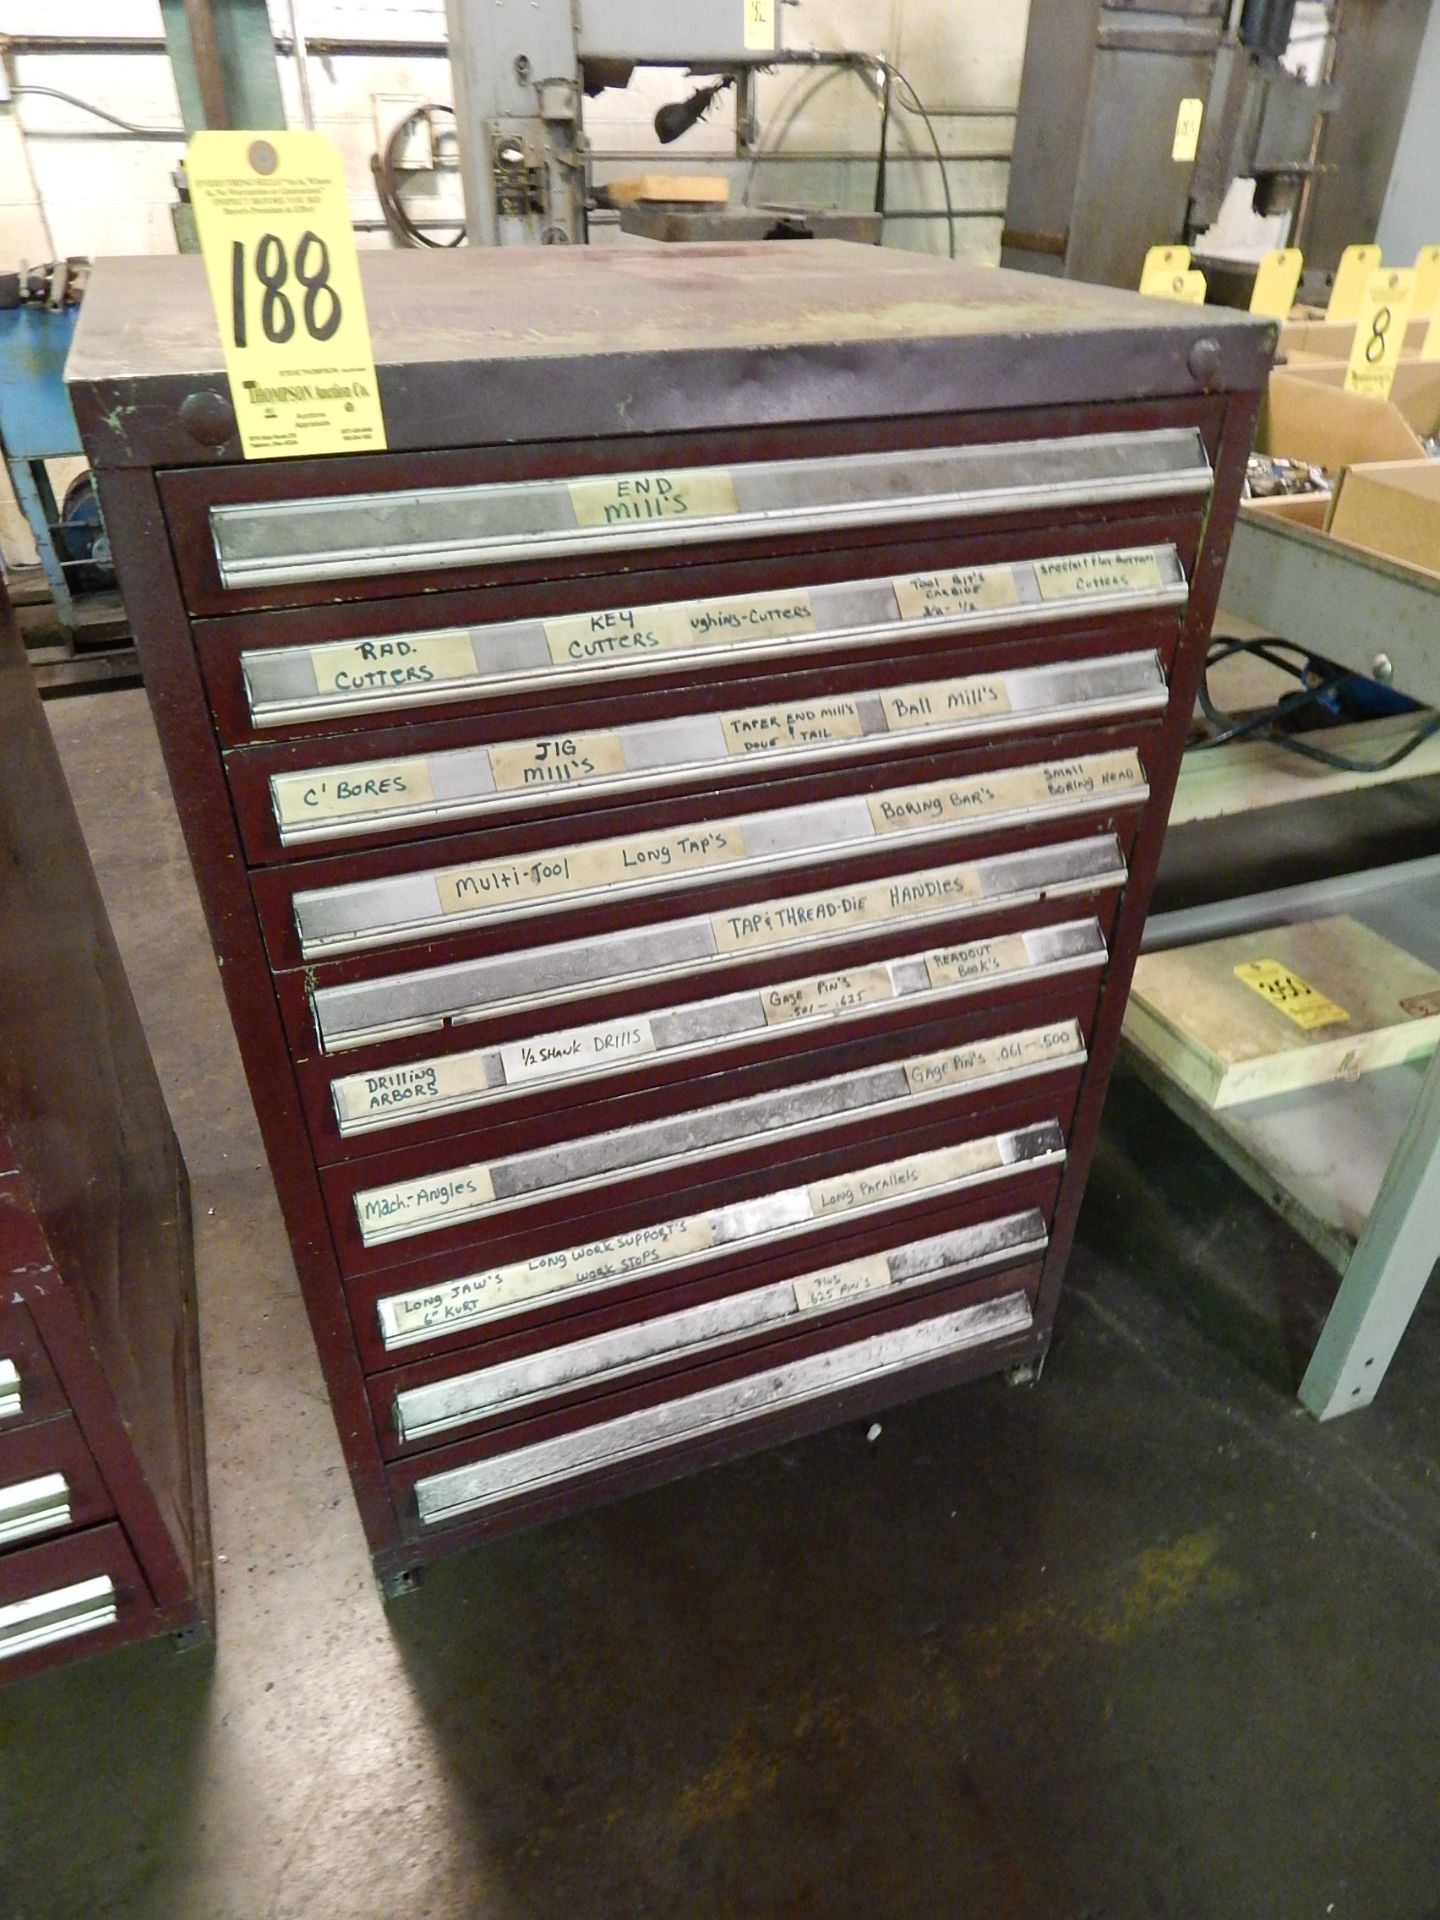 9 Drawer Tooling Cabinet, 44 1/2 In. Tall, 30 In. Wide, 27 3/4 In. Deep, Loading Fee $50.00 - Image 3 of 6